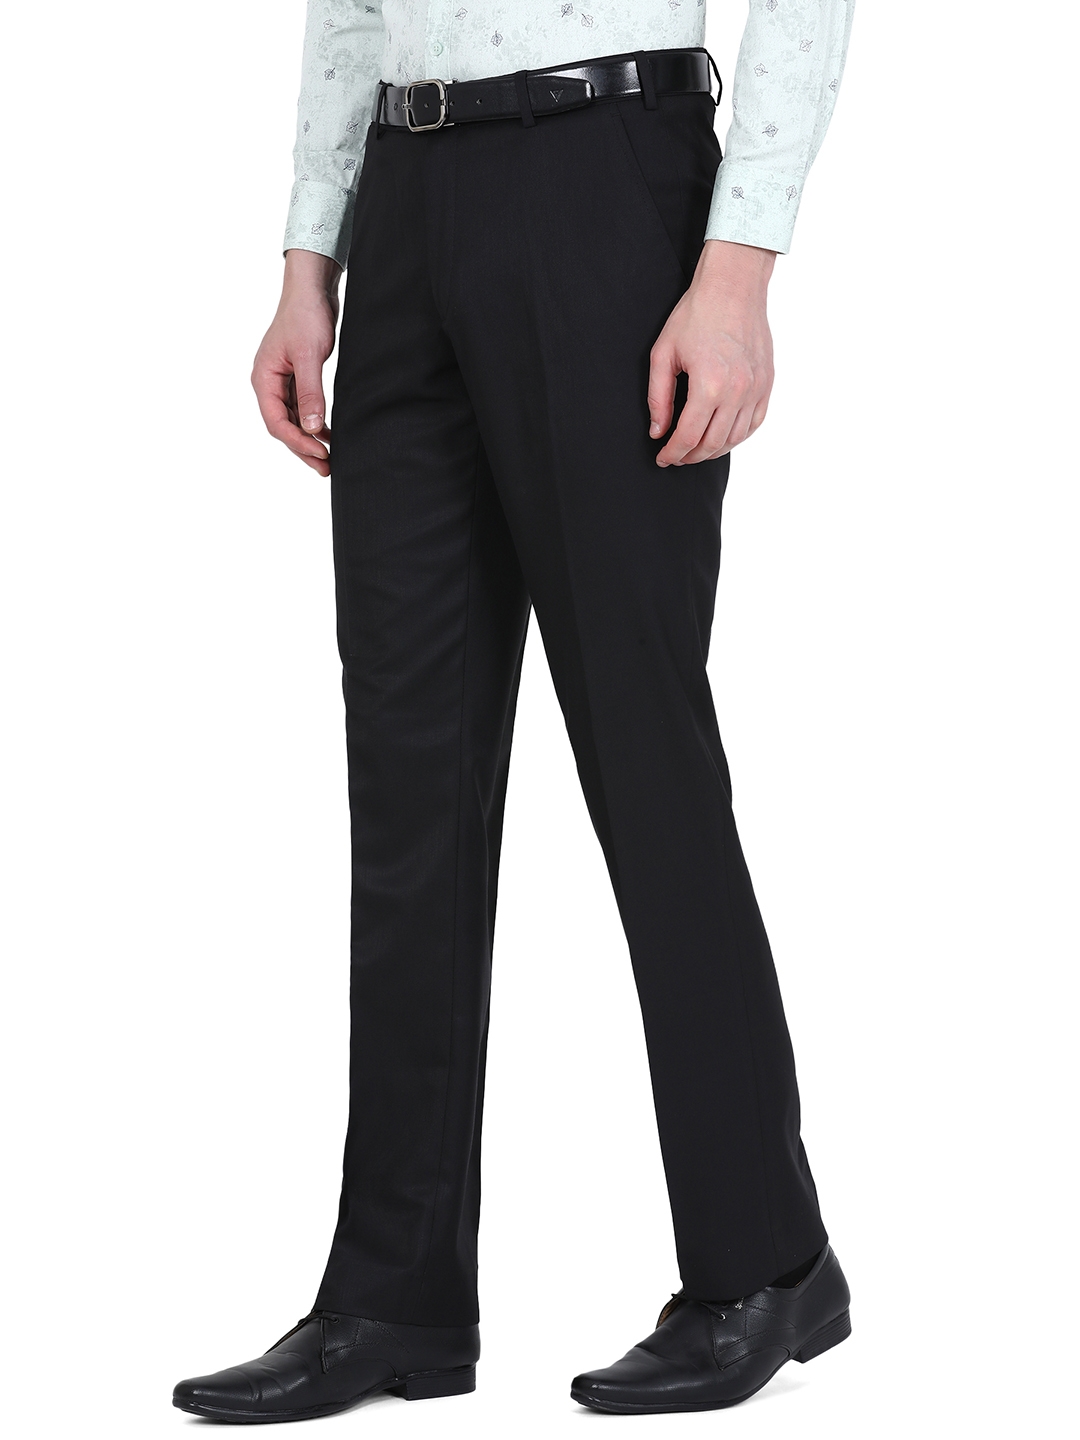 Greenfibre | Black Solid Classic fit Formal Trouser | Greenfibre 1